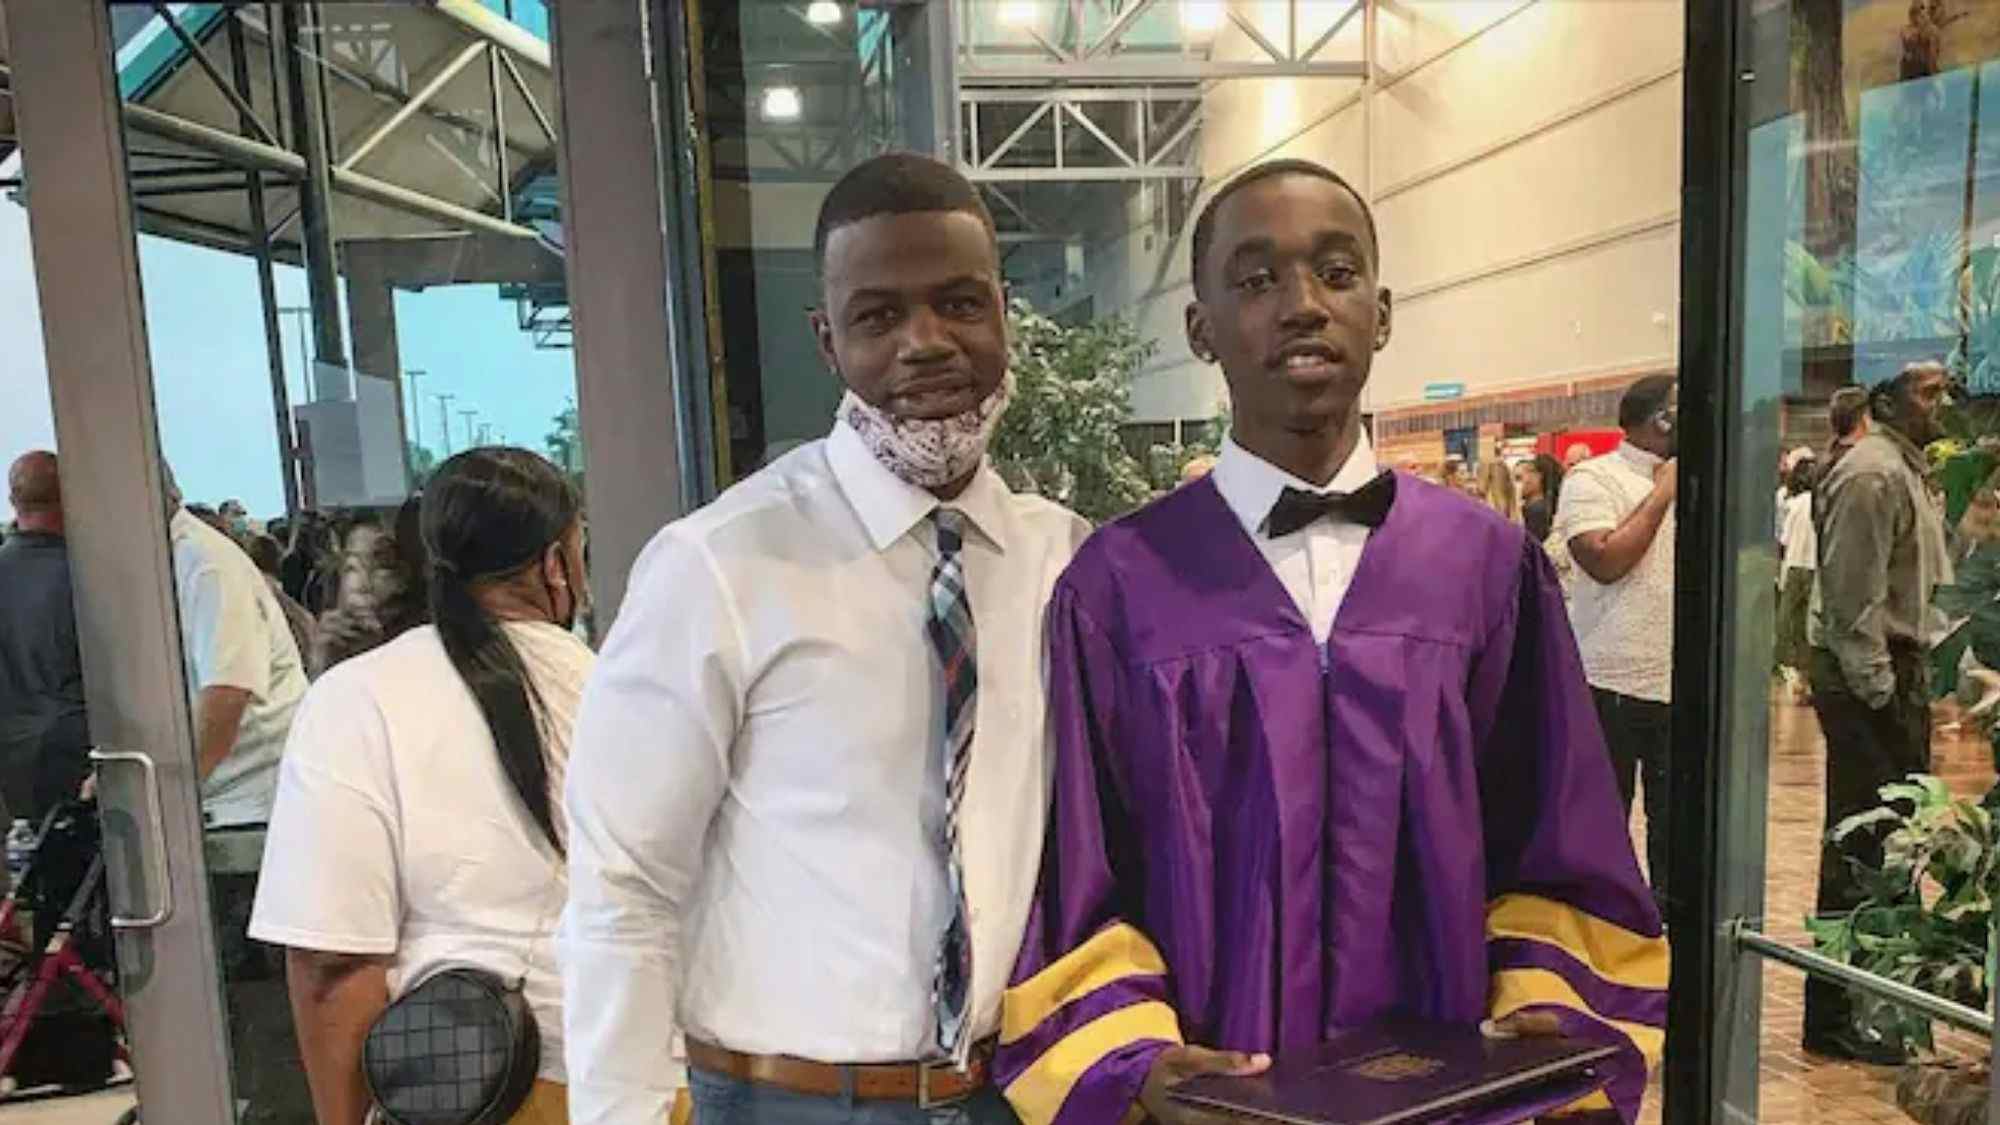 Teacher lends shoes to graduating student to comply with dress code